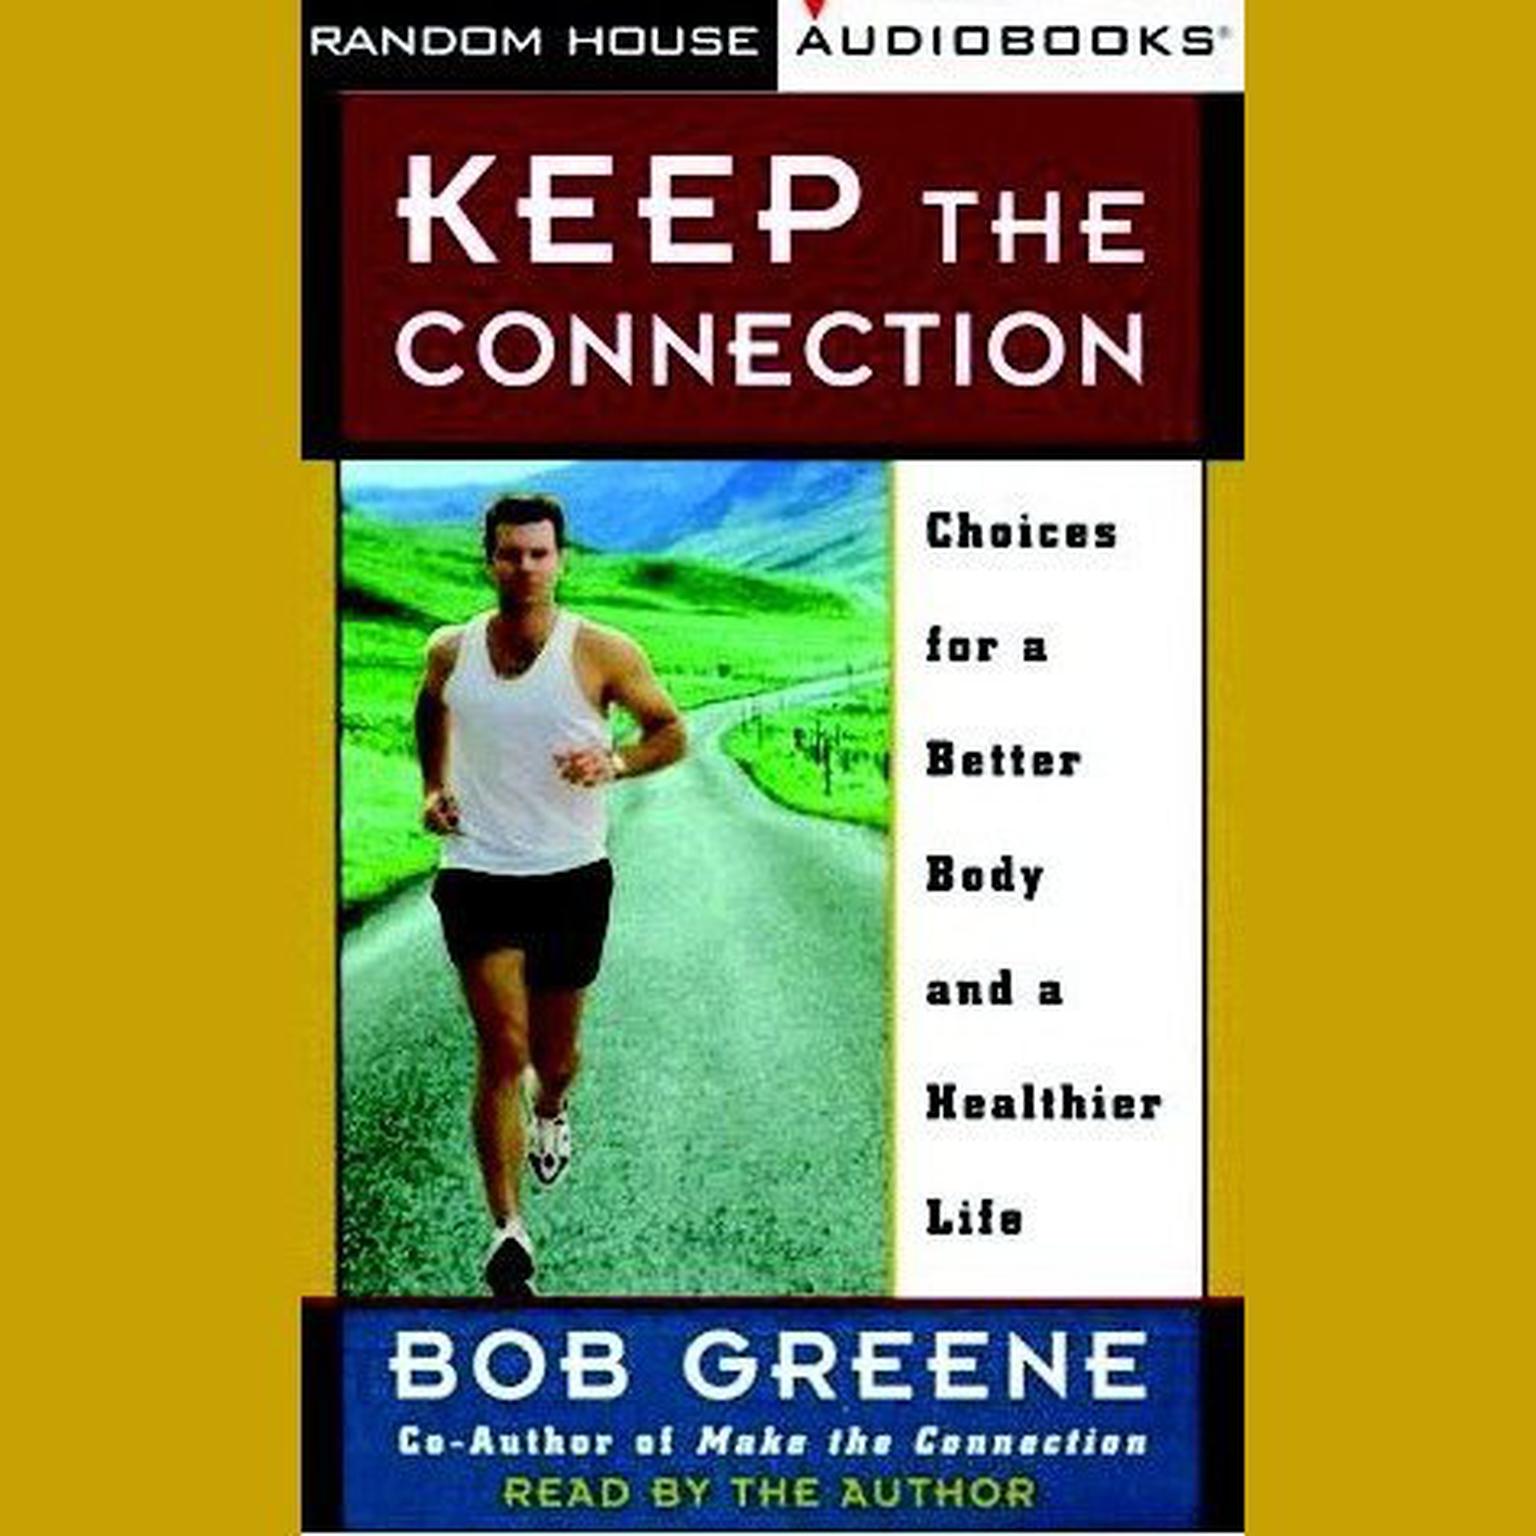 Keep the Connection (Abridged): Choices for a Better Body and a Healthier Life Audiobook, by Bob Greene